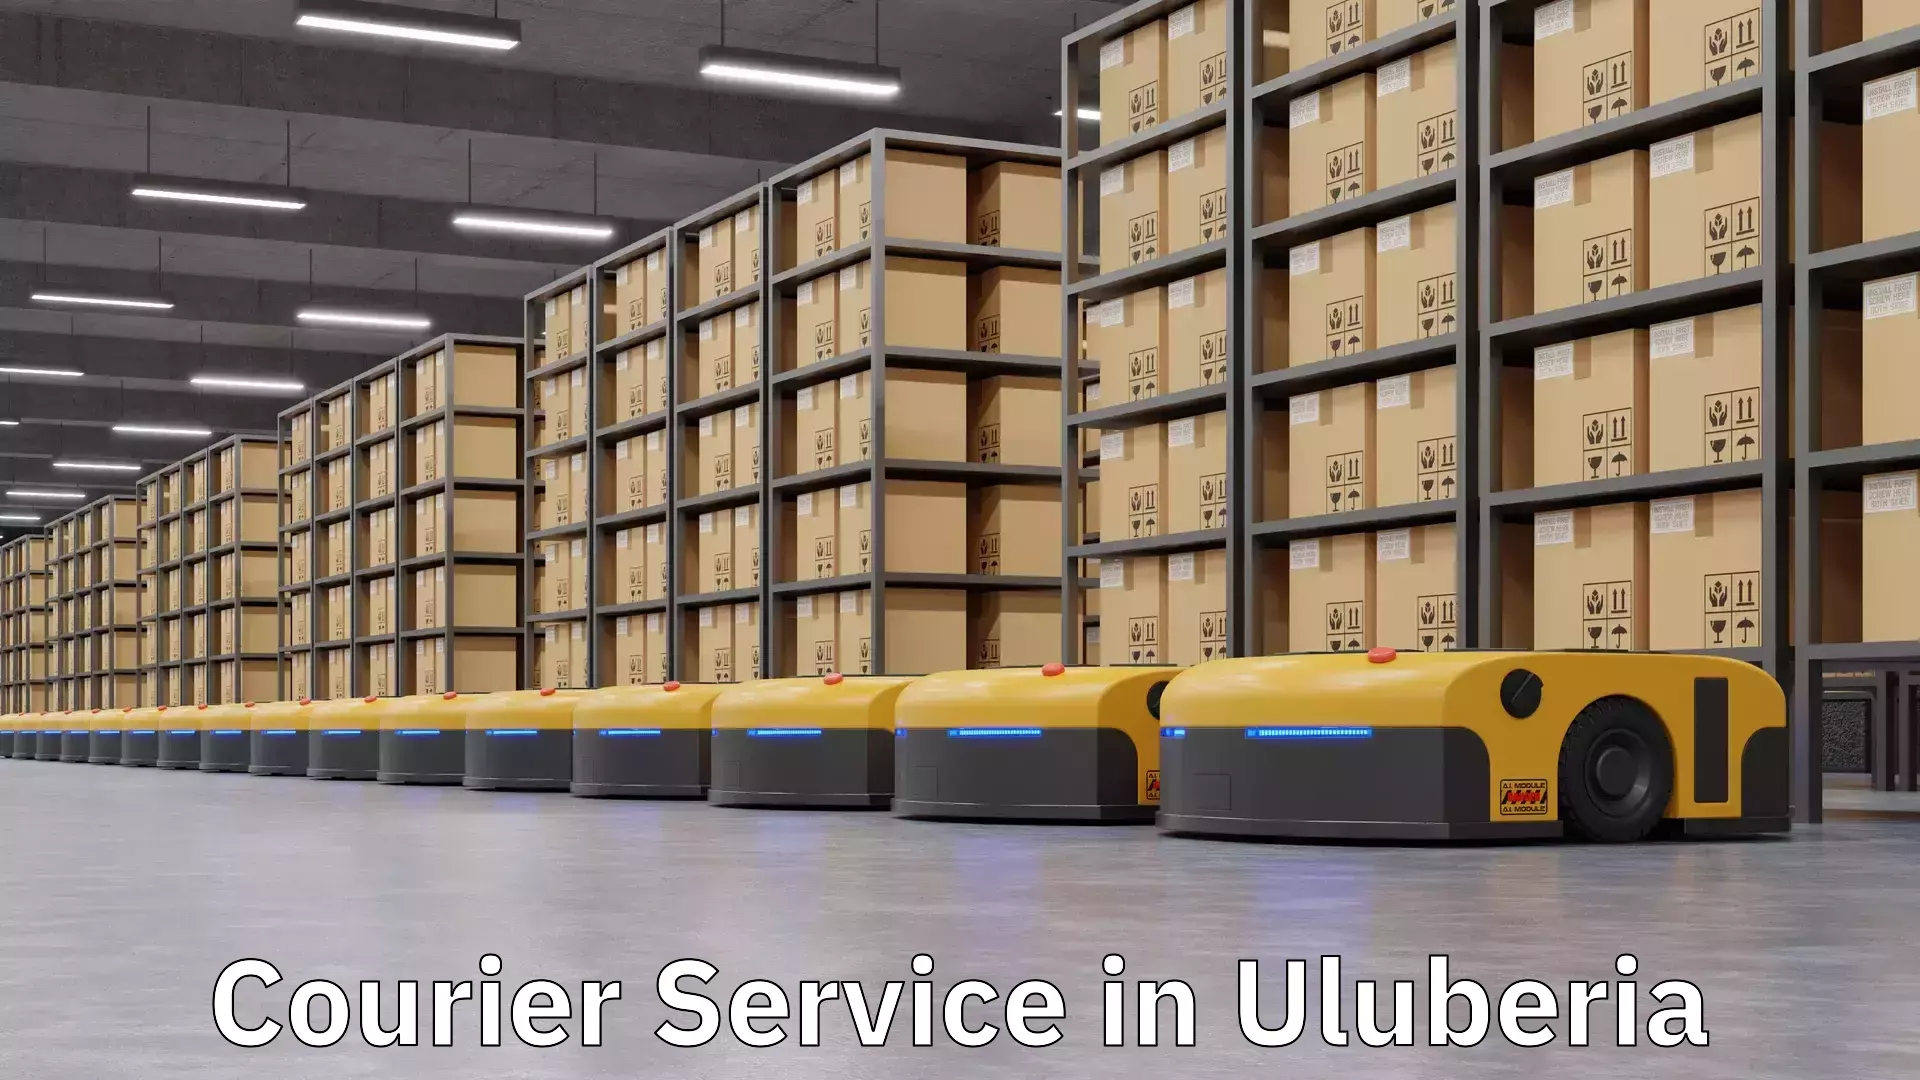 State-of-the-art courier technology in Uluberia